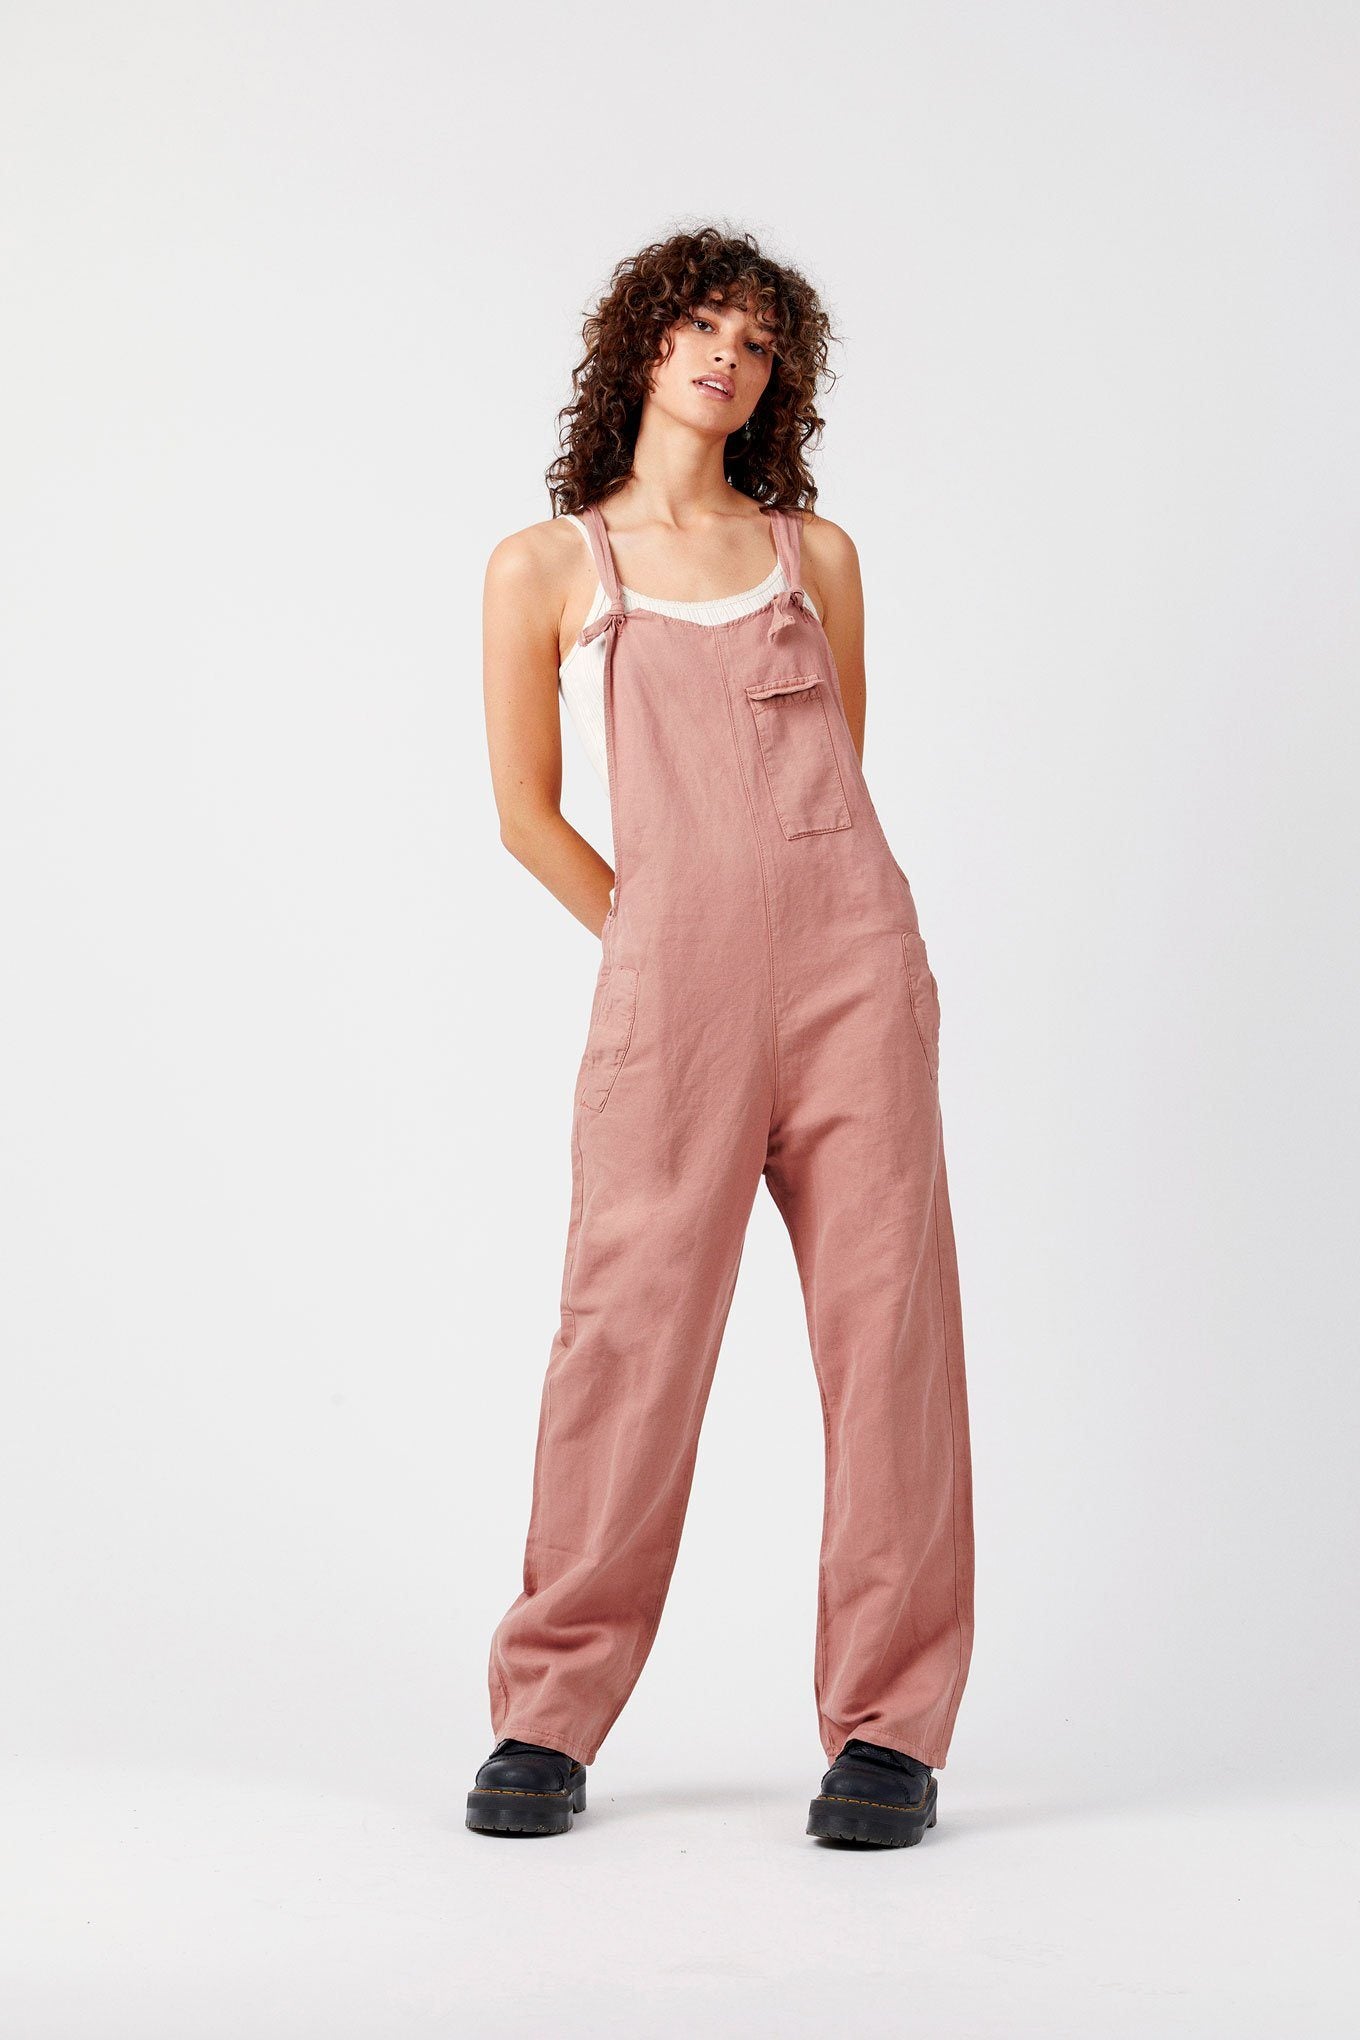 MARY-LOU Pink - GOTS Organic Cotton Dungarees by Flax & Loom, SIZE 3 / UK 12 / EUR 40